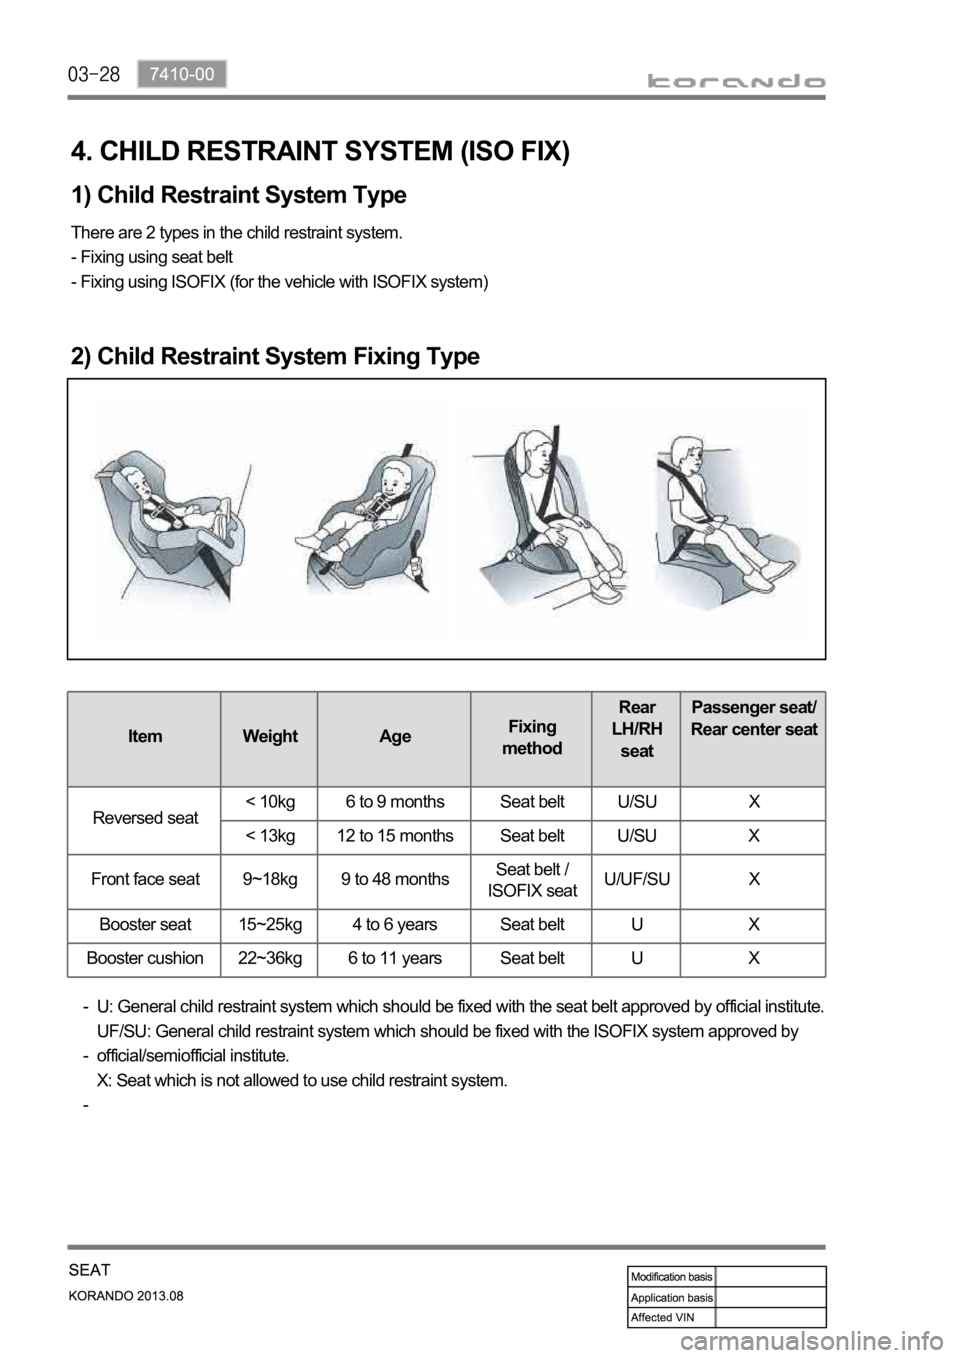 SSANGYONG KORANDO 2013  Service Manual 1) Child Restraint System Type
There are 2 types in the child restraint system.
- Fixing using seat belt
- Fixing using ISOFIX (for the vehicle with ISOFIX system)
2) Child Restraint System Fixing Typ